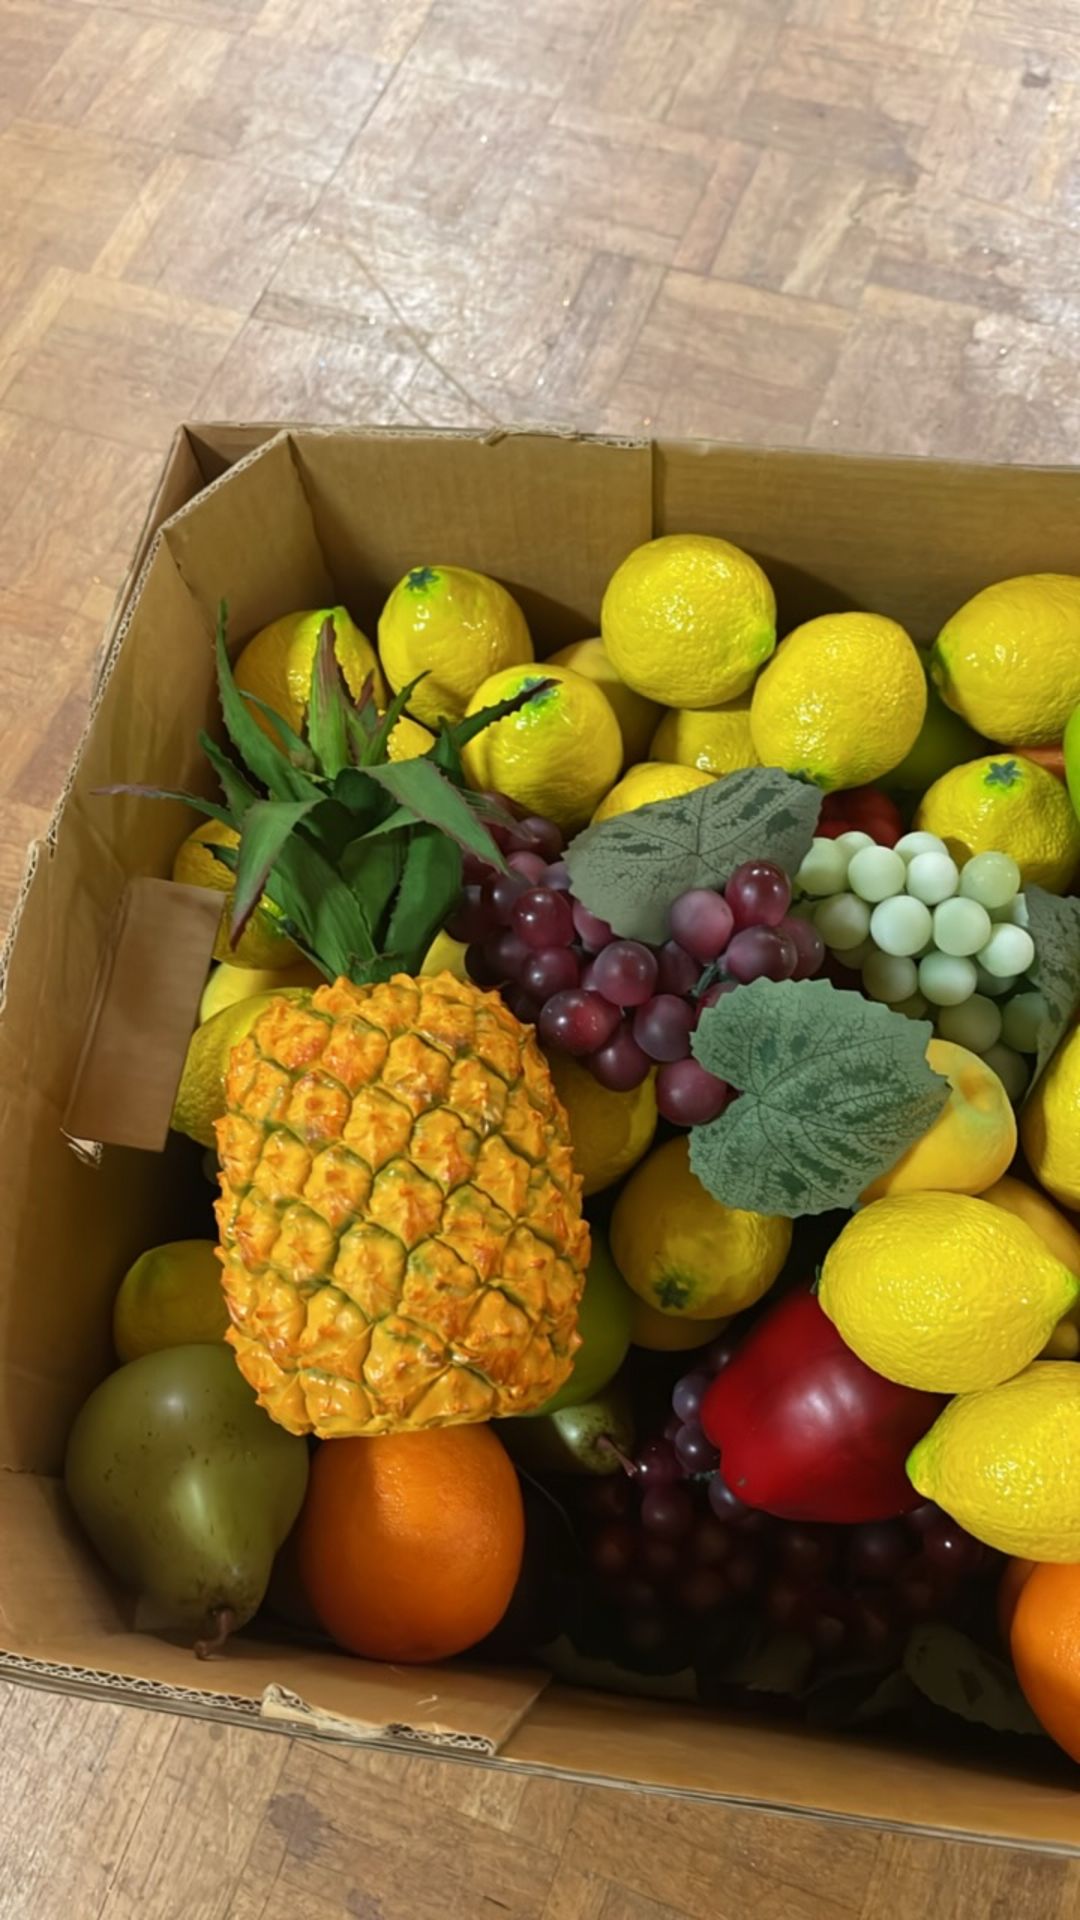 Box Of Artificial Fruit - Image 4 of 4